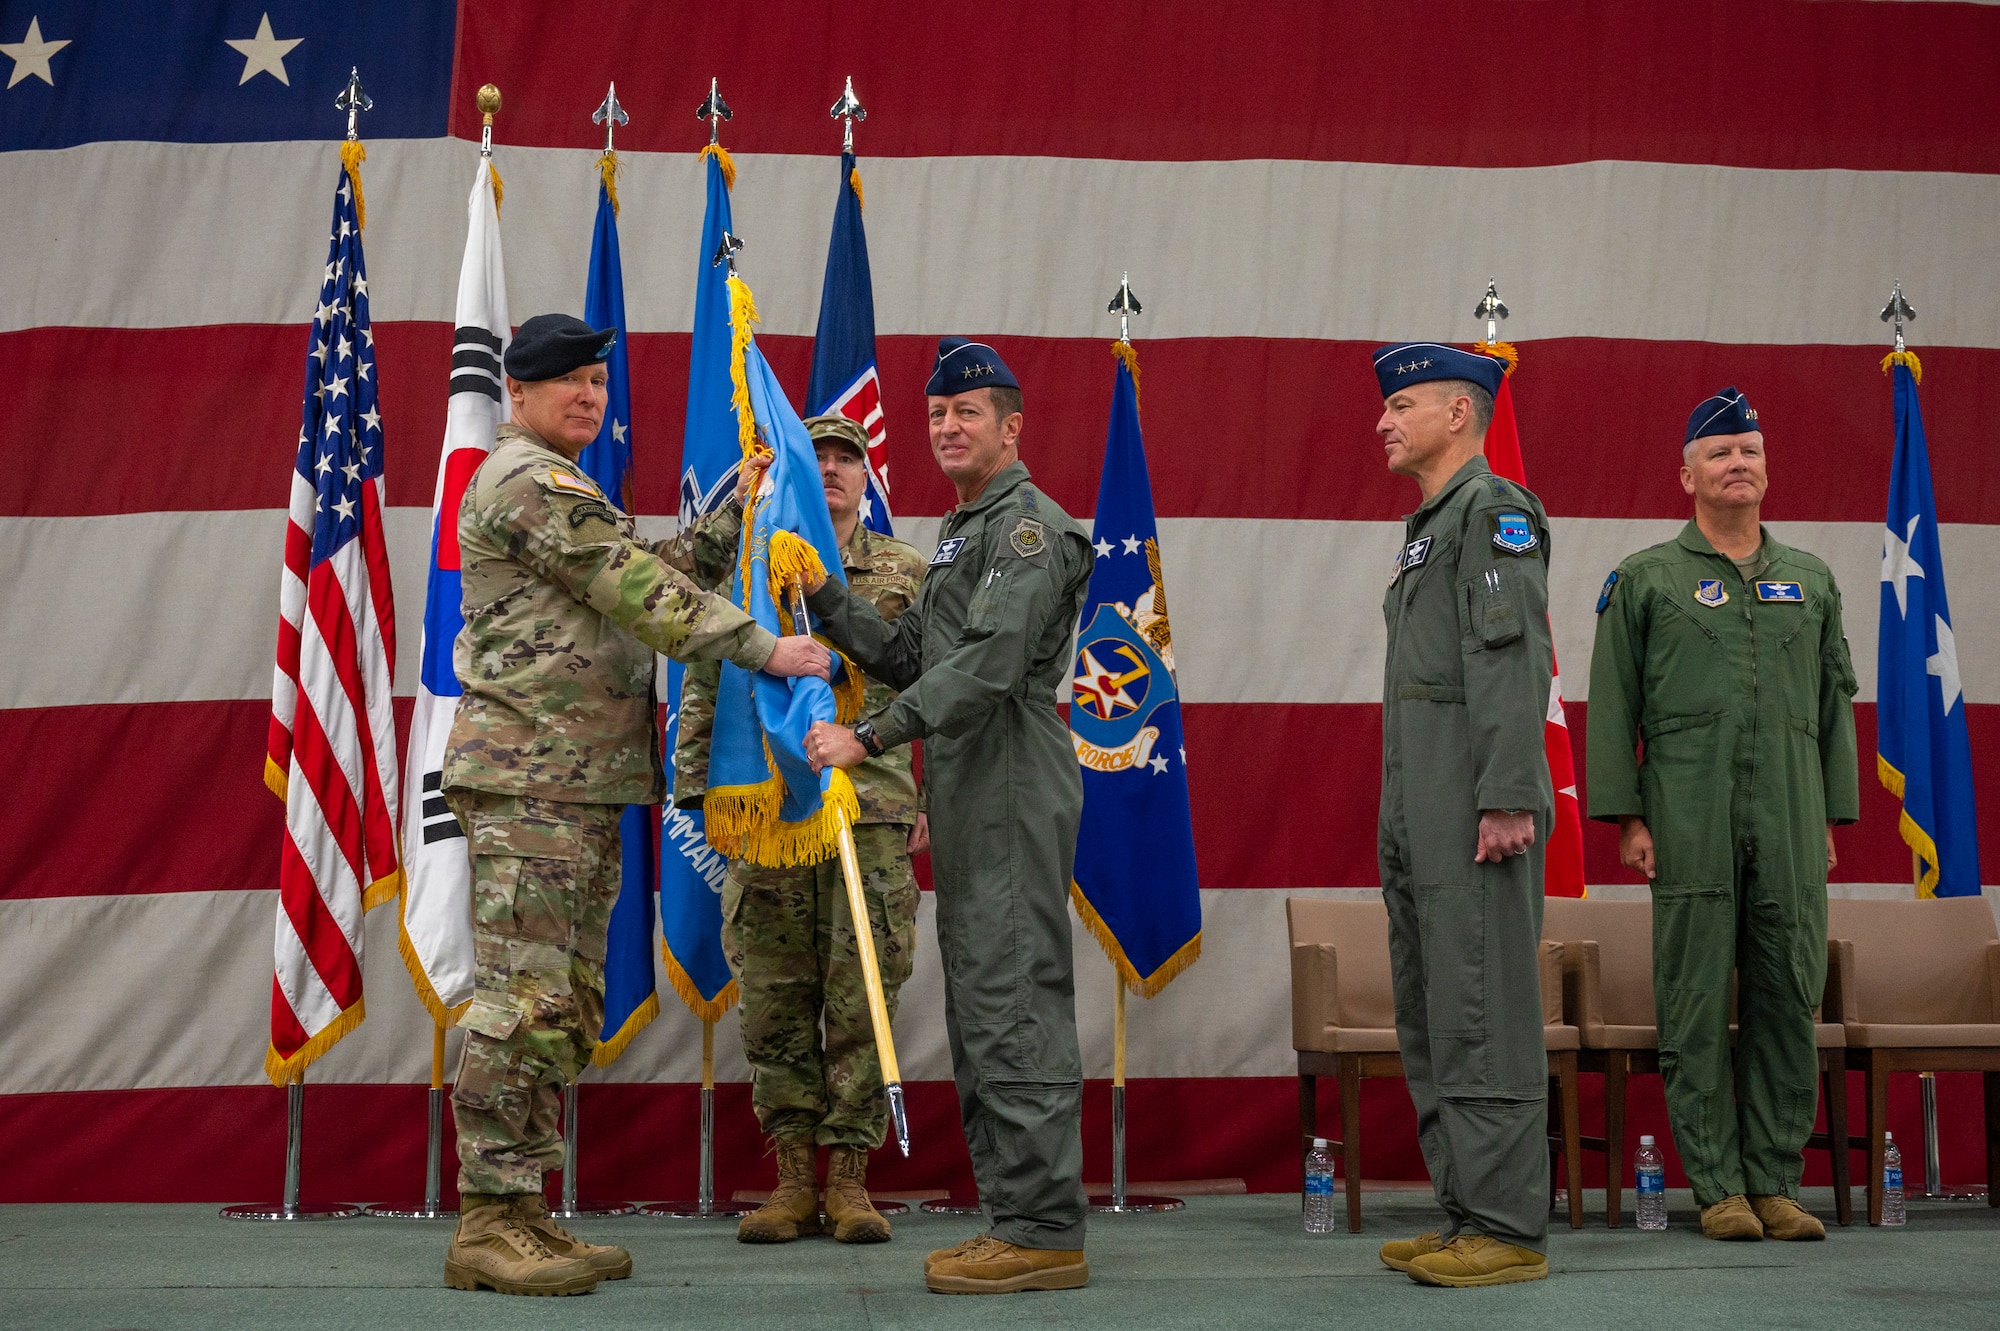 U.S. Army Gen. Paul LaCamera, United Nations Command, ROK-U.S. Combined Forces Command and United States Forces Korea commander, presents the guidon to U.S. Air Force Lt. Gen. David Iverson, incoming Seventh Air Force commander at Osan Air Base, Republic of Korea, on a stage in front of a flag.